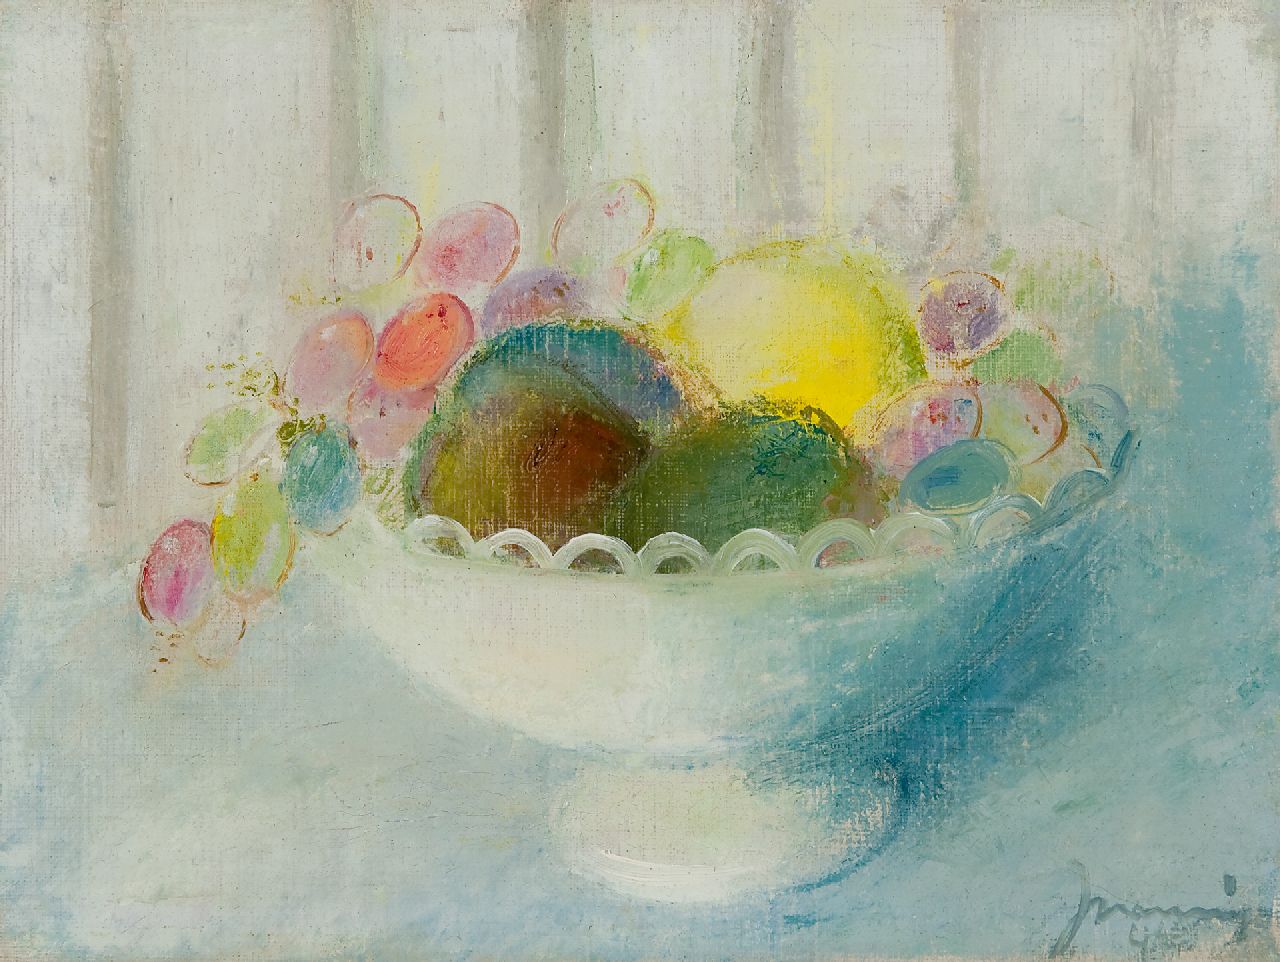 Nanninga J.  | Jacob 'Jaap' Nanninga | Paintings offered for sale | Bowl with fruit, oil on canvas 22.7 x 30.0 cm, signed l.r. and dated '46